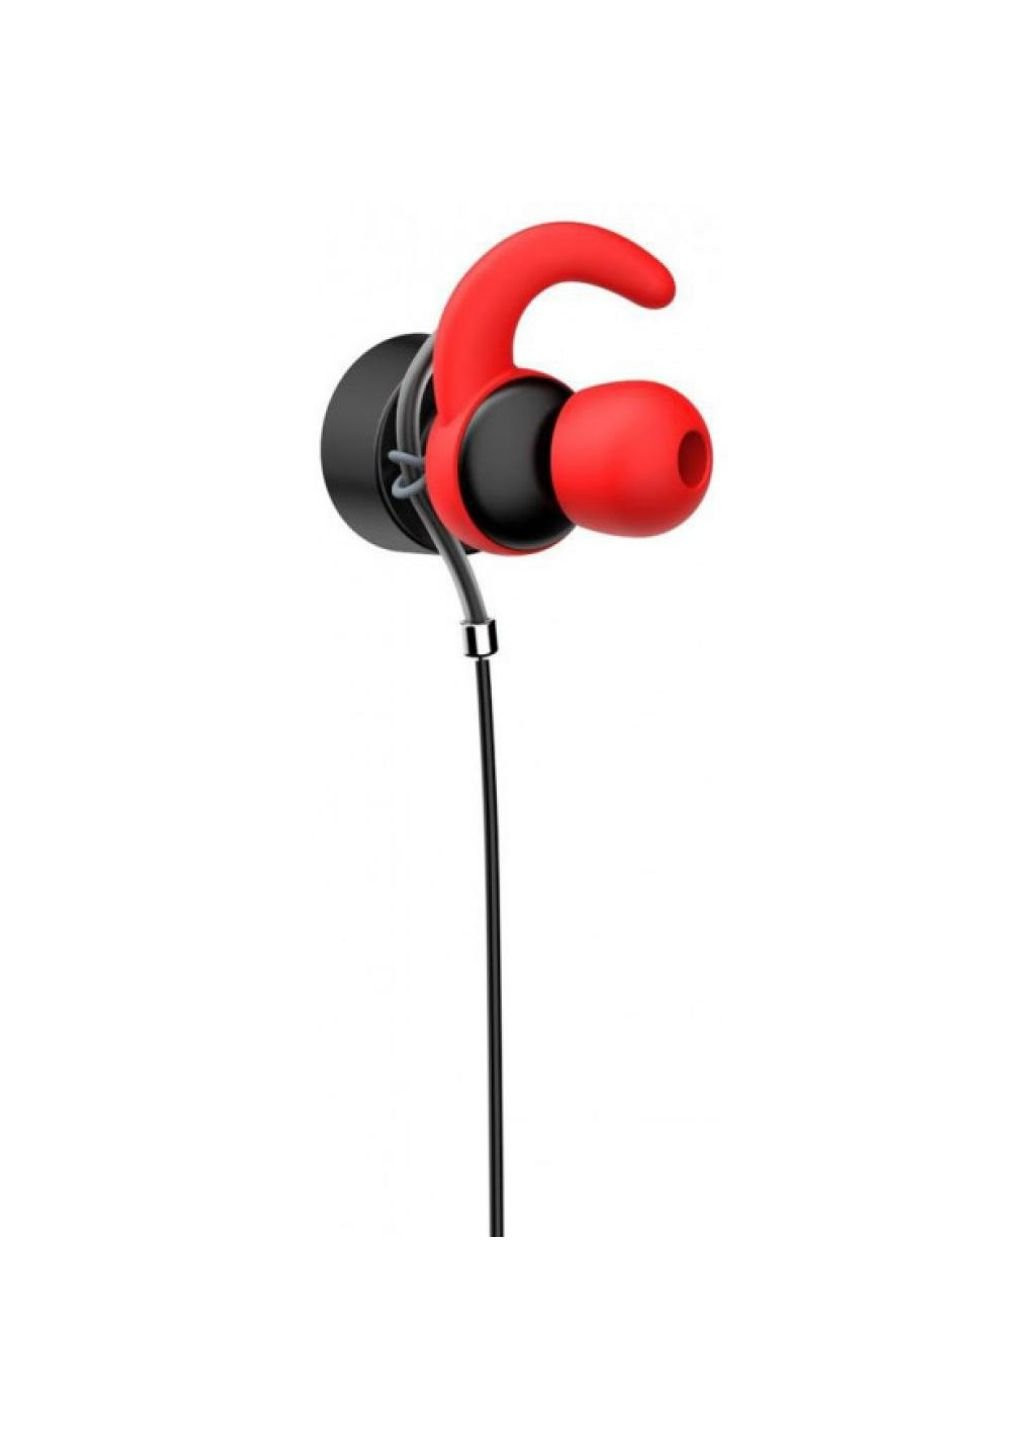 Навушники DHE-7004RD Gaming Headset Red (DHE-7004RD) HP (250310270)